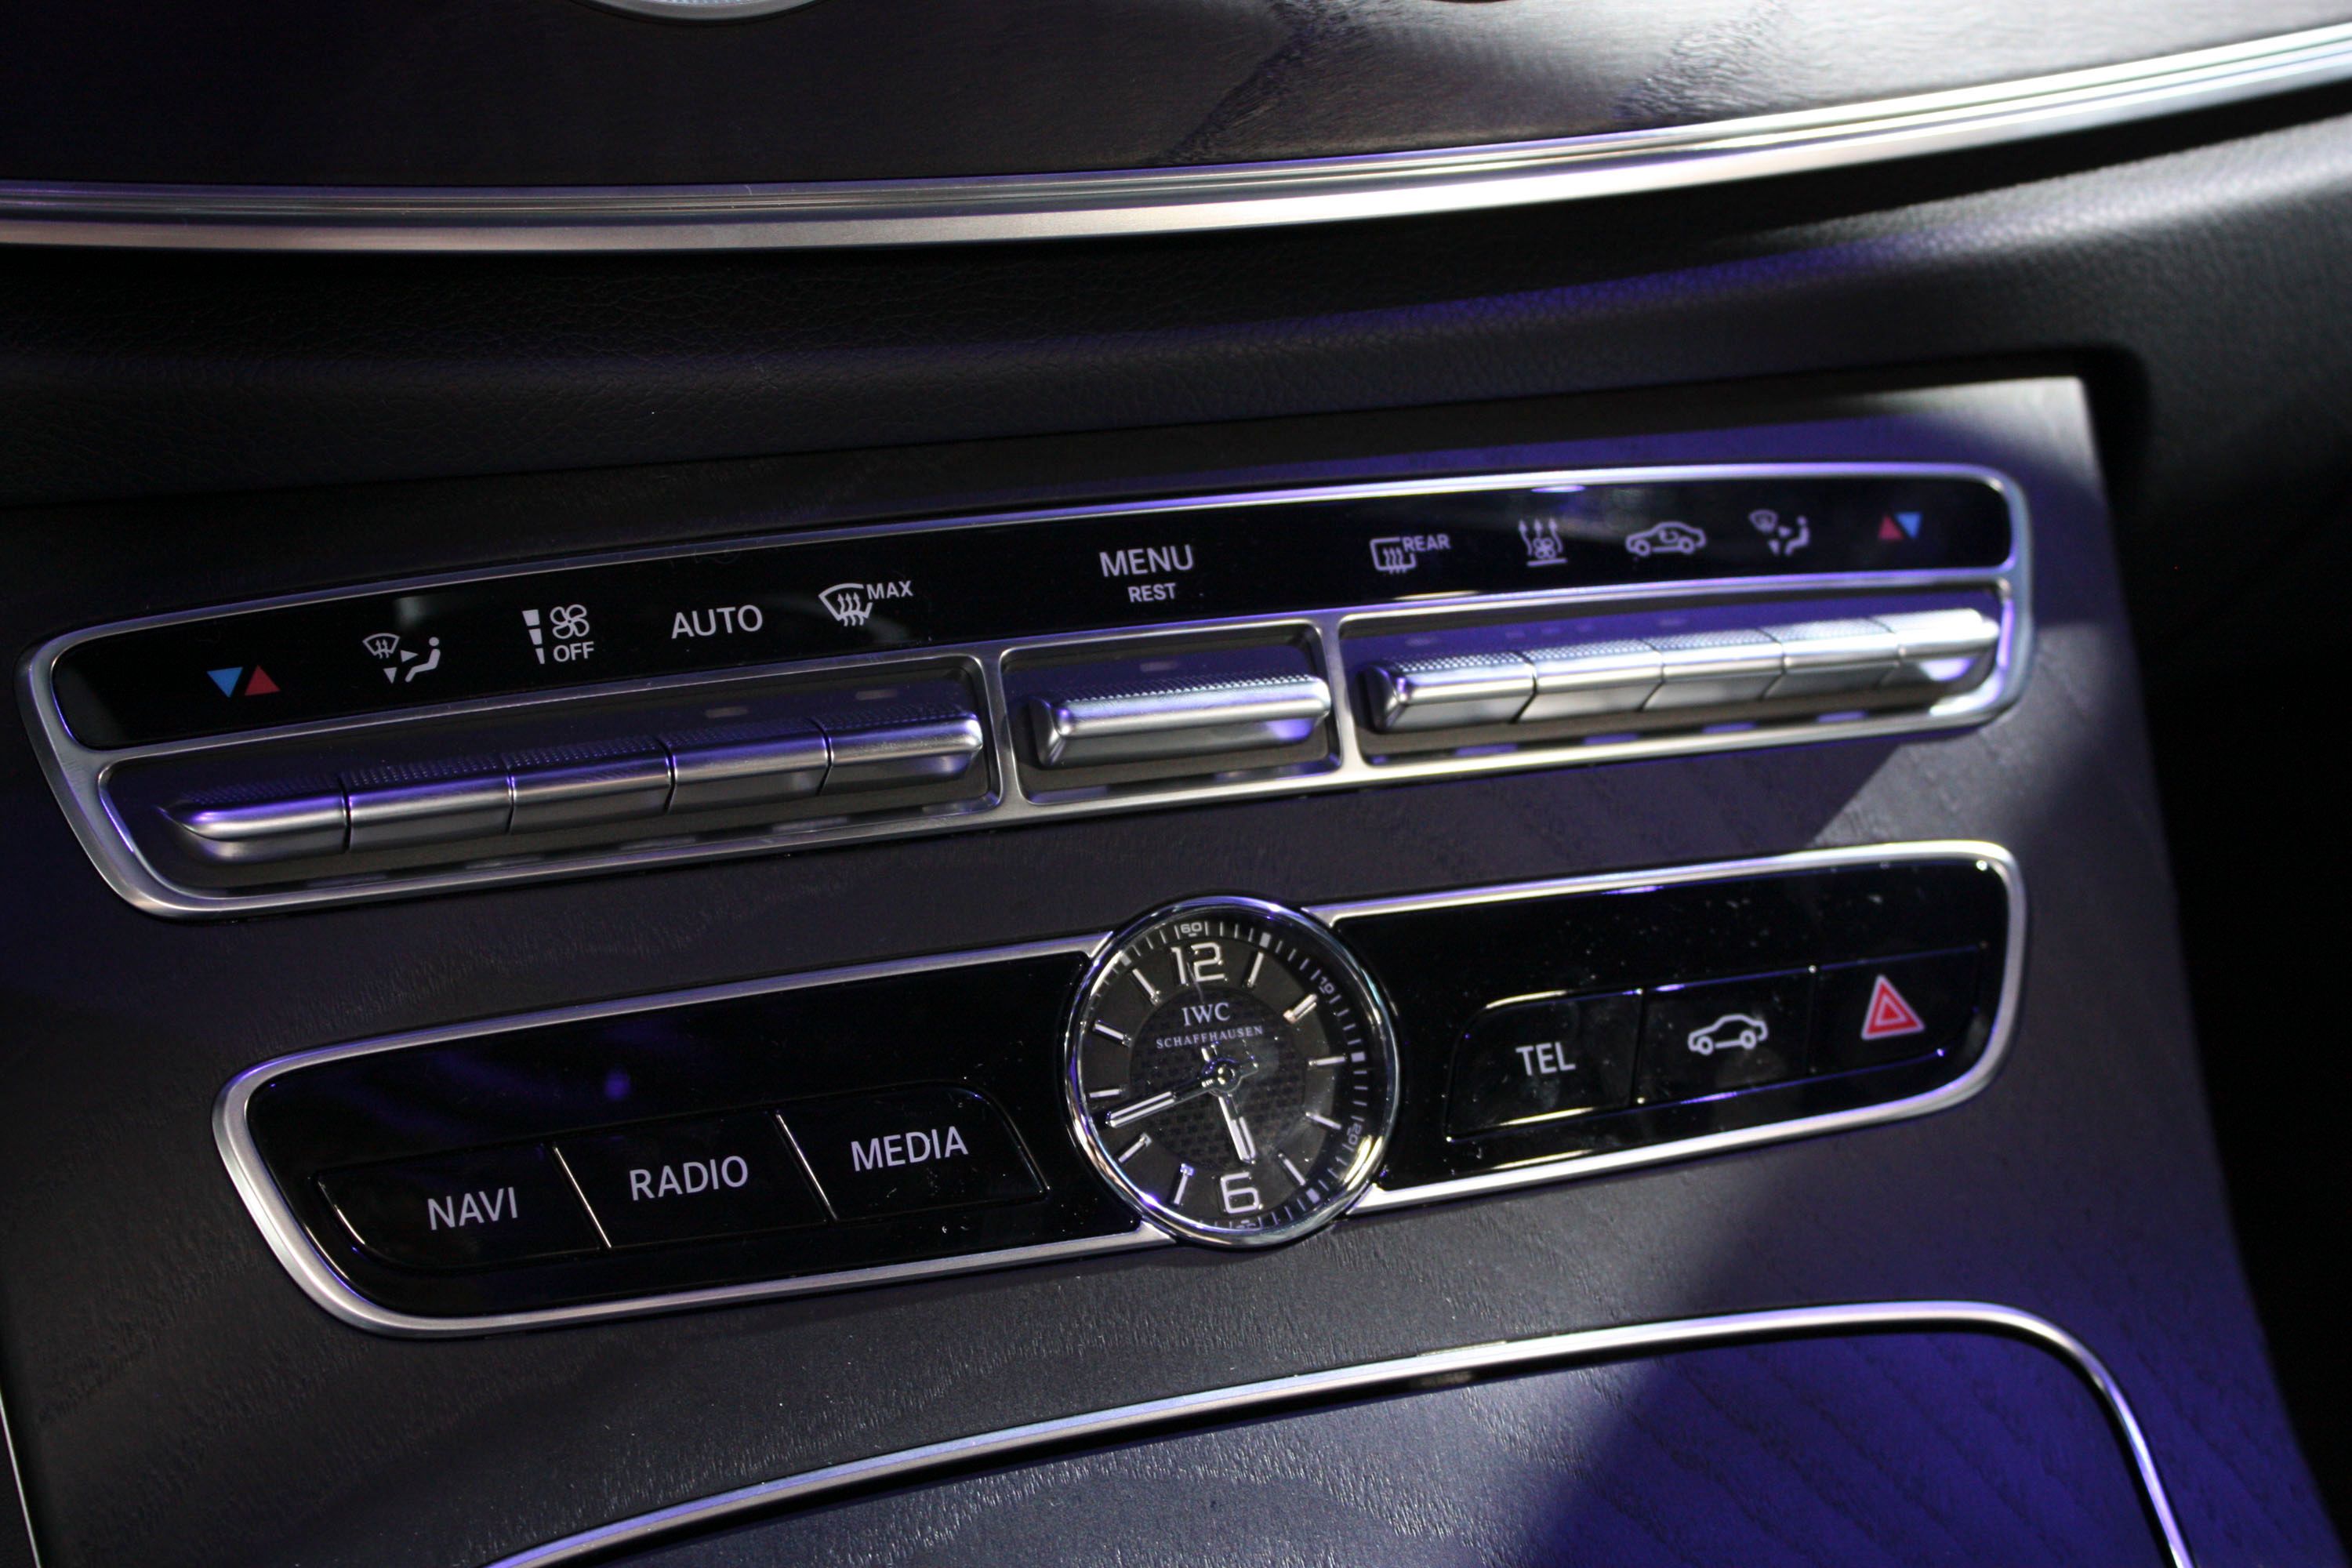 Driver assistance features from S-Class